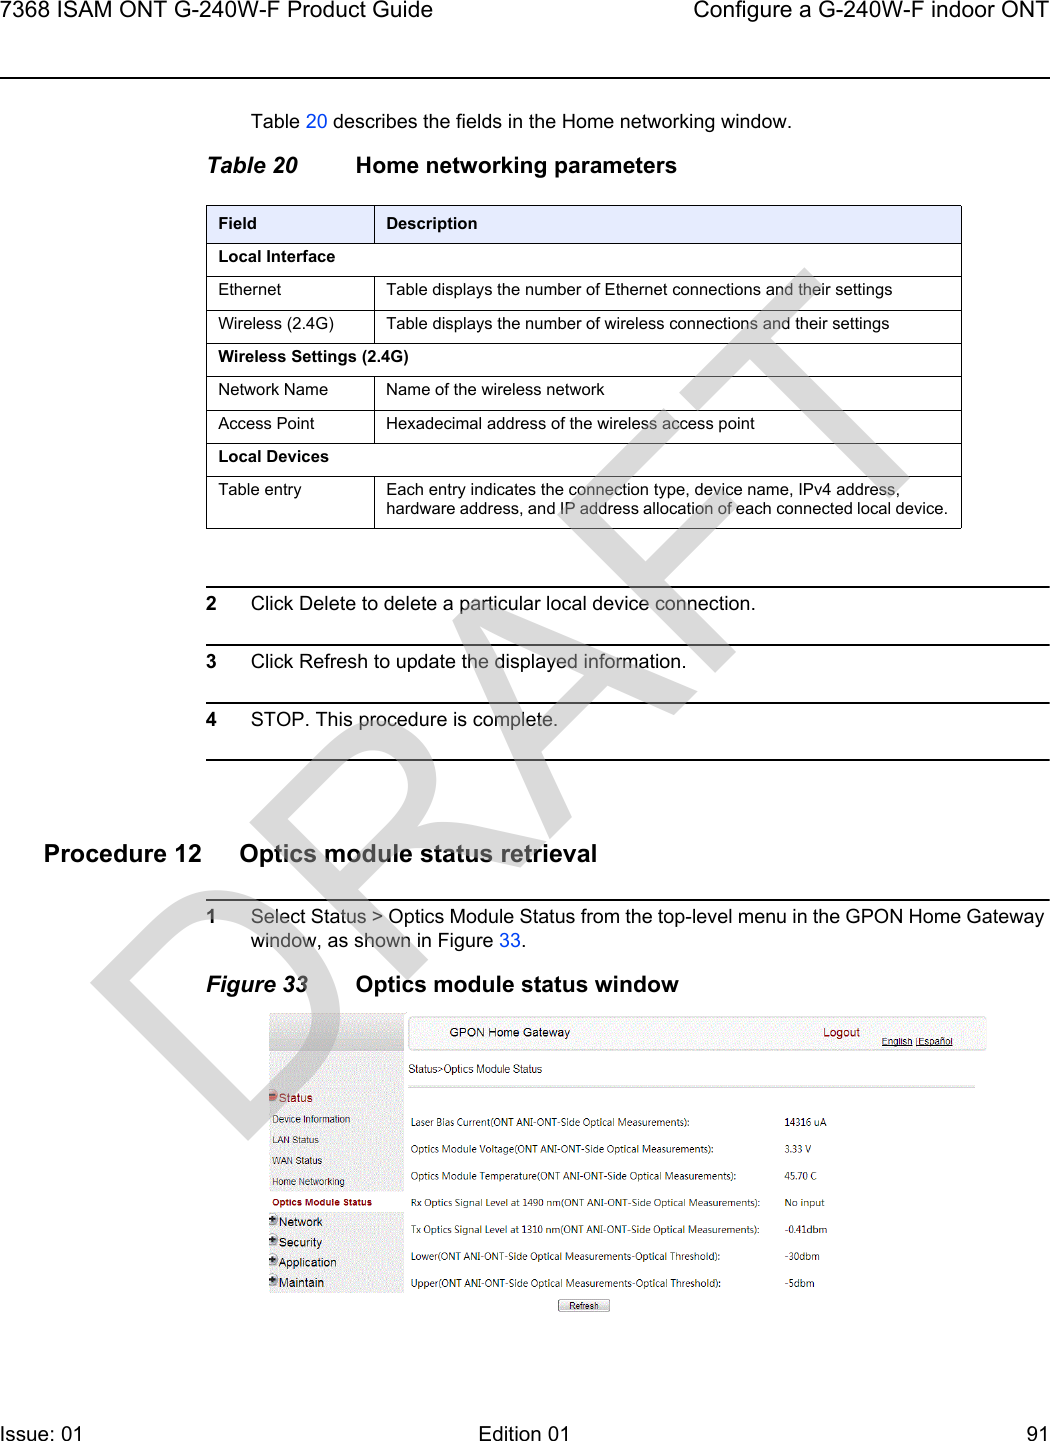 7368 ISAM ONT G-240W-F Product Guide Configure a G-240W-F indoor ONTIssue: 01 Edition 01 91 Table 20 describes the fields in the Home networking window.Table 20 Home networking parameters2Click Delete to delete a particular local device connection. 3Click Refresh to update the displayed information. 4STOP. This procedure is complete.Procedure 12 Optics module status retrieval1Select Status &gt; Optics Module Status from the top-level menu in the GPON Home Gateway window, as shown in Figure 33.Figure 33 Optics module status windowField DescriptionLocal InterfaceEthernet Table displays the number of Ethernet connections and their settingsWireless (2.4G) Table displays the number of wireless connections and their settingsWireless Settings (2.4G)Network Name Name of the wireless networkAccess Point Hexadecimal address of the wireless access pointLocal DevicesTable entry Each entry indicates the connection type, device name, IPv4 address, hardware address, and IP address allocation of each connected local device.DRAFT